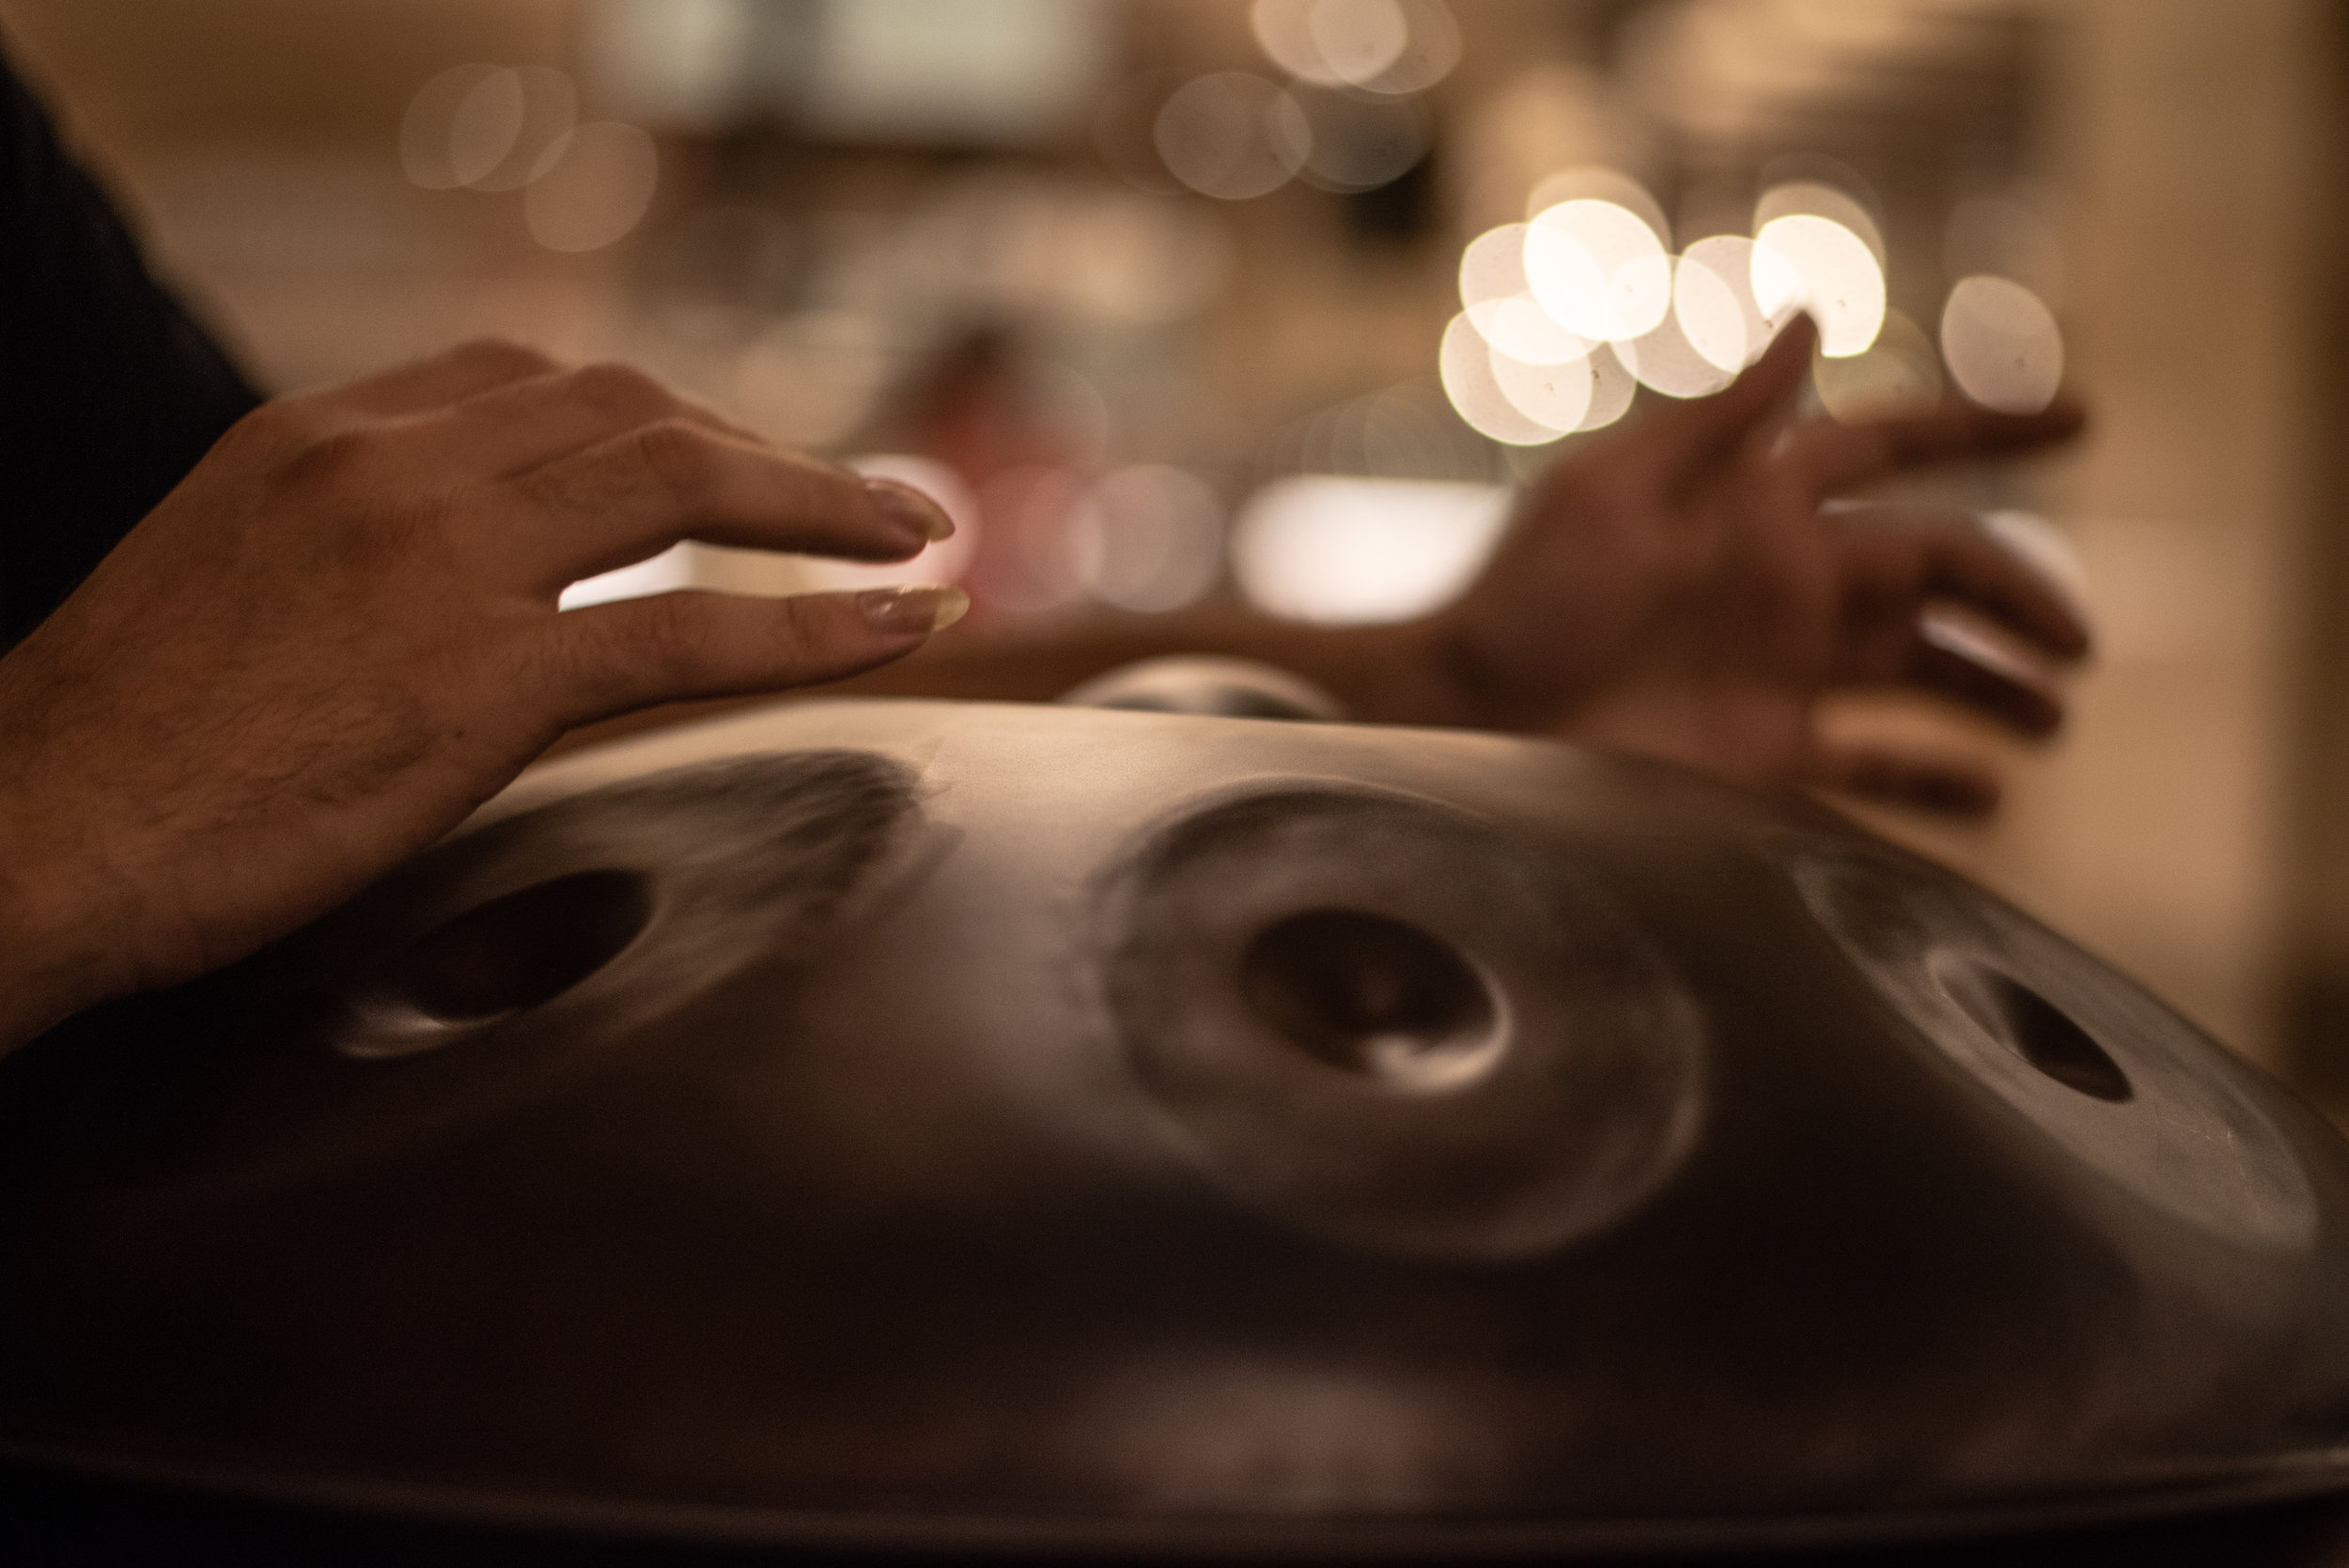  The Hang, a class of steel drum known as a hand pan, is played by gently striking the grooved areas with fingers. Each section is precisely tuned to produce a specific note.  